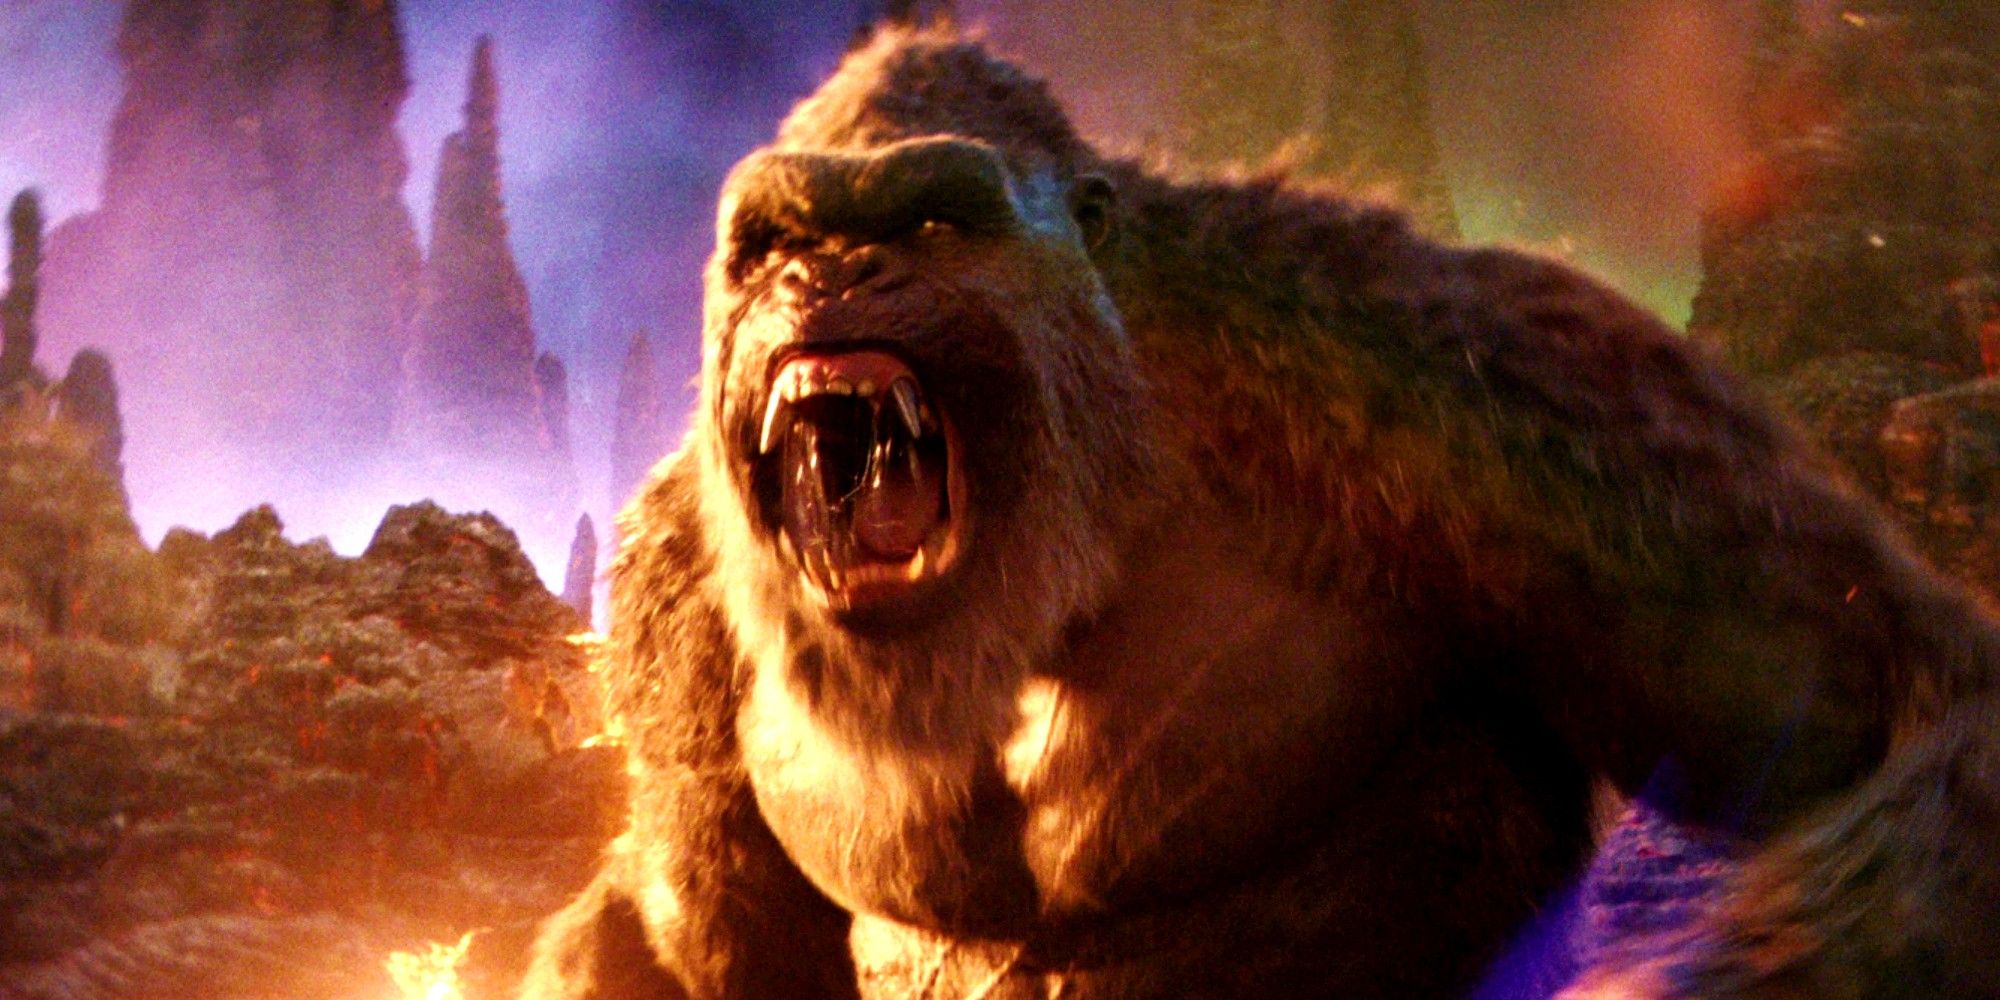 kong-catches-a-ride-on-godzilla’s-back-in-new-gxk-trailer